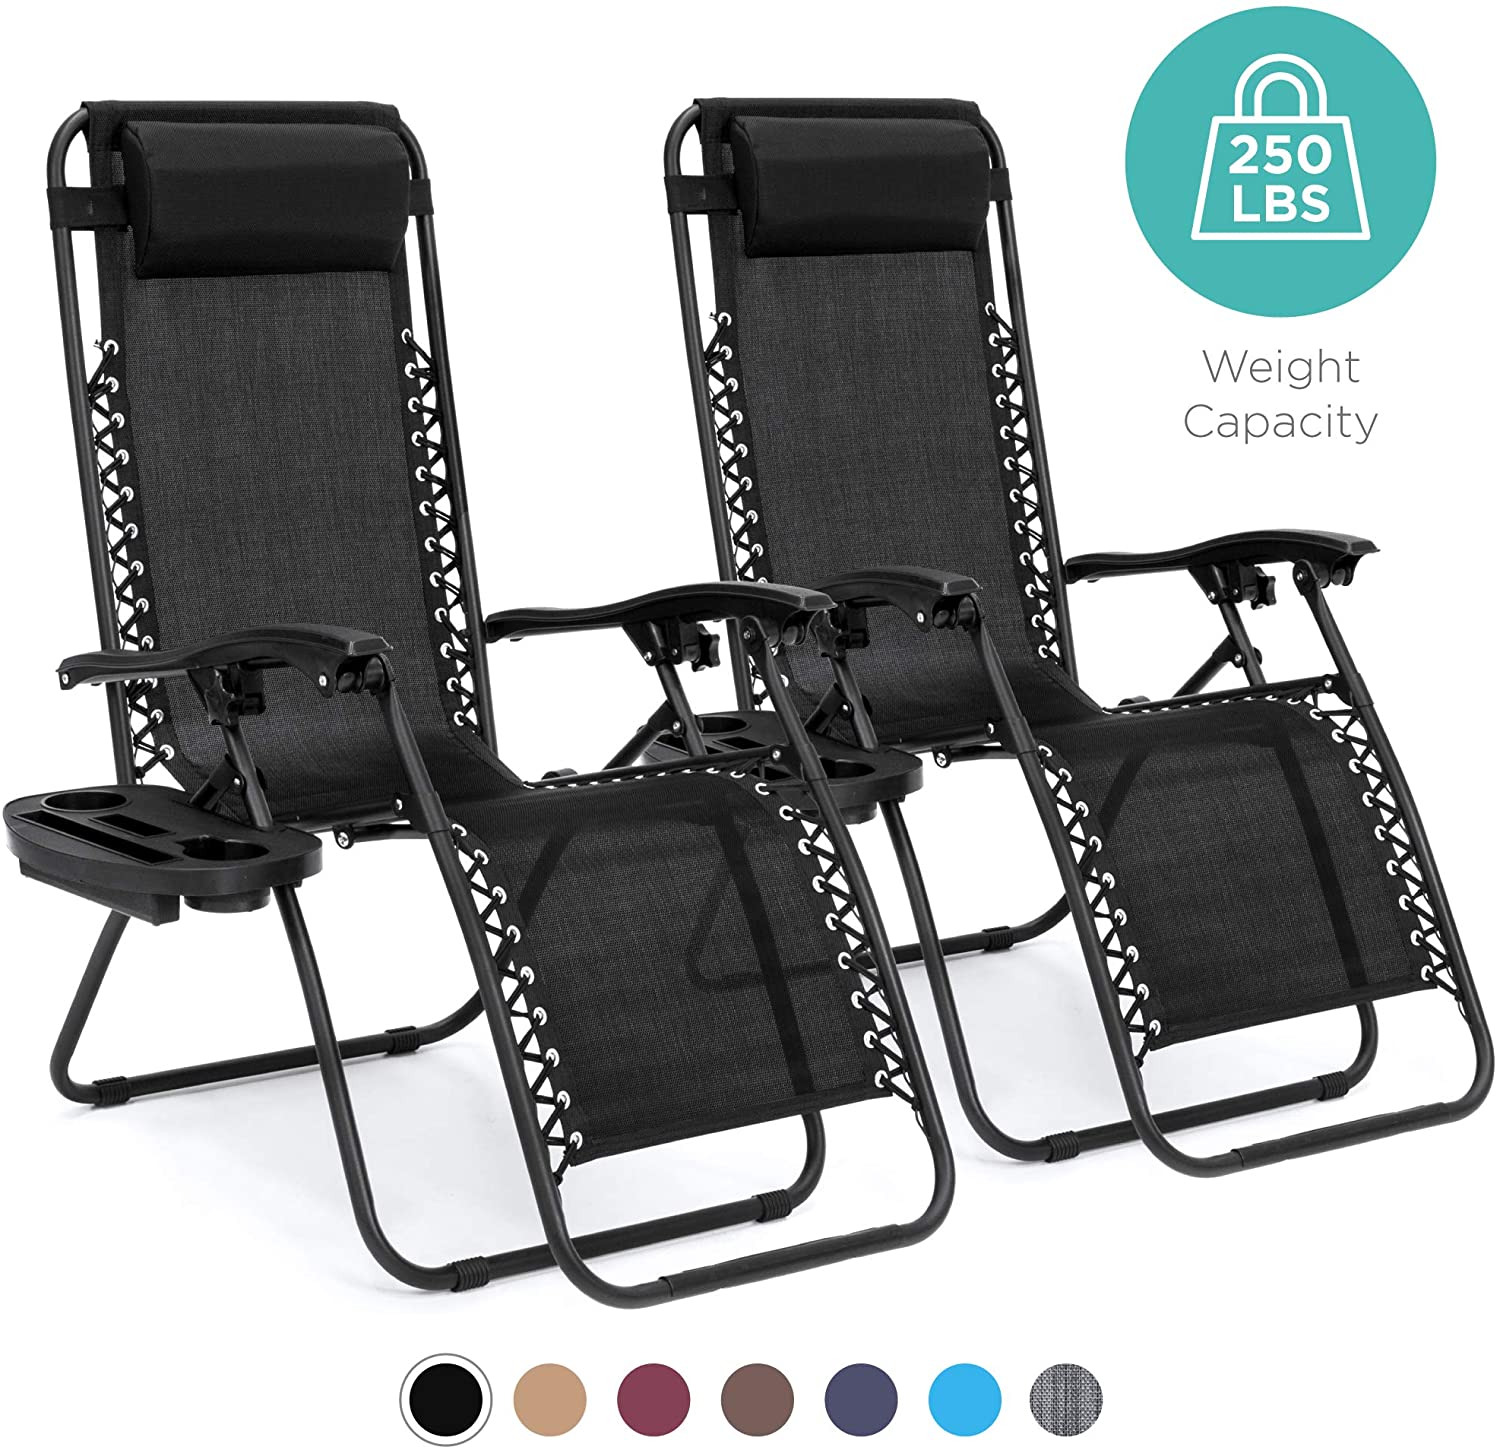 Best Choice Products Set of 2 Adjustable Zero Gravity Lounge Chair Recliners for Patio, Pool w/Cup Holders - Black